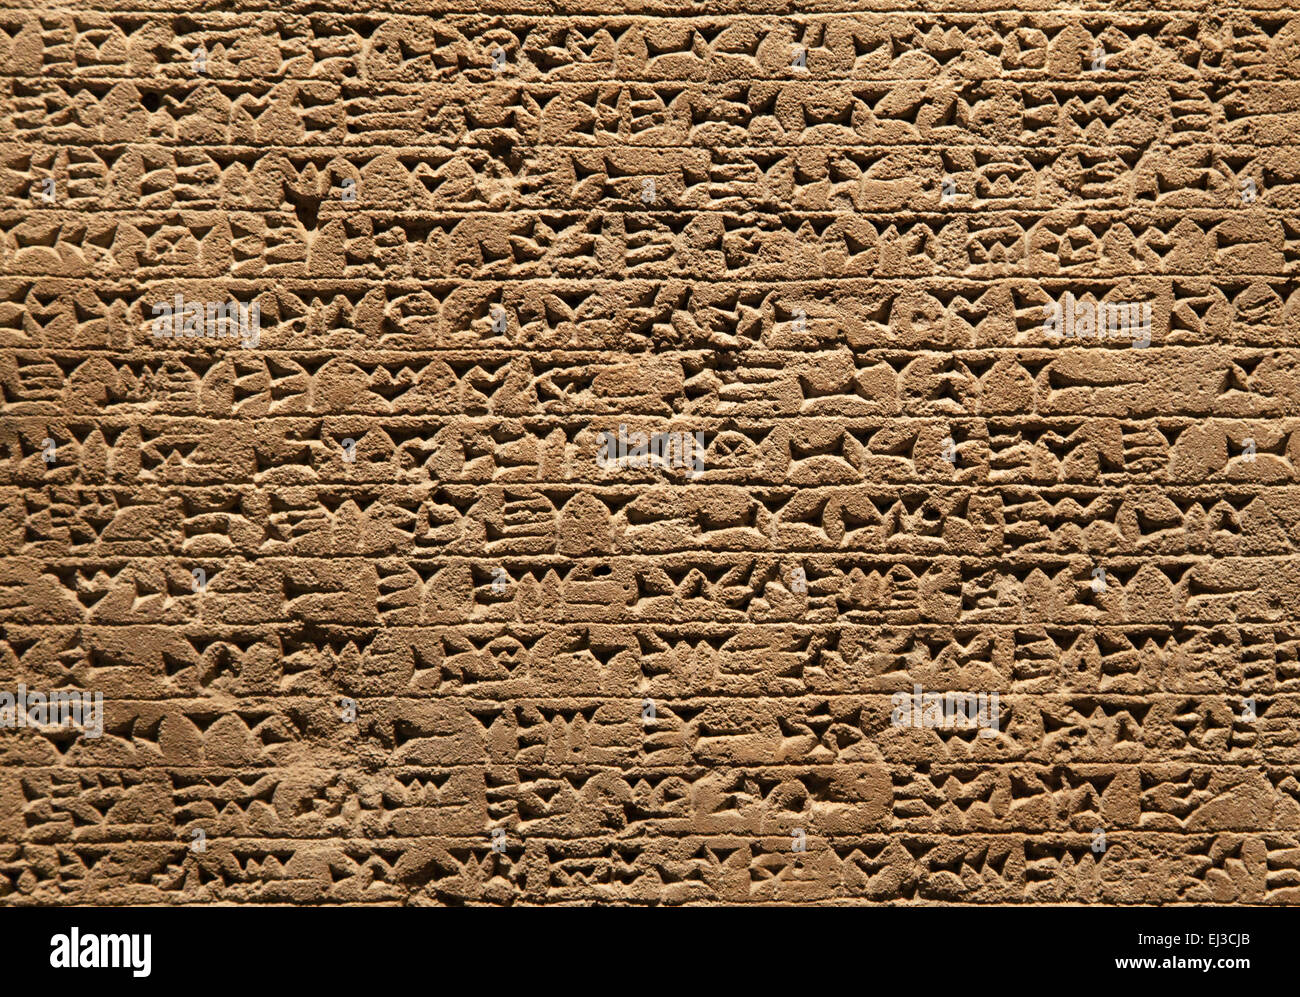 Close-up of ancient clay tablet with cuneiform writings Stock Photo